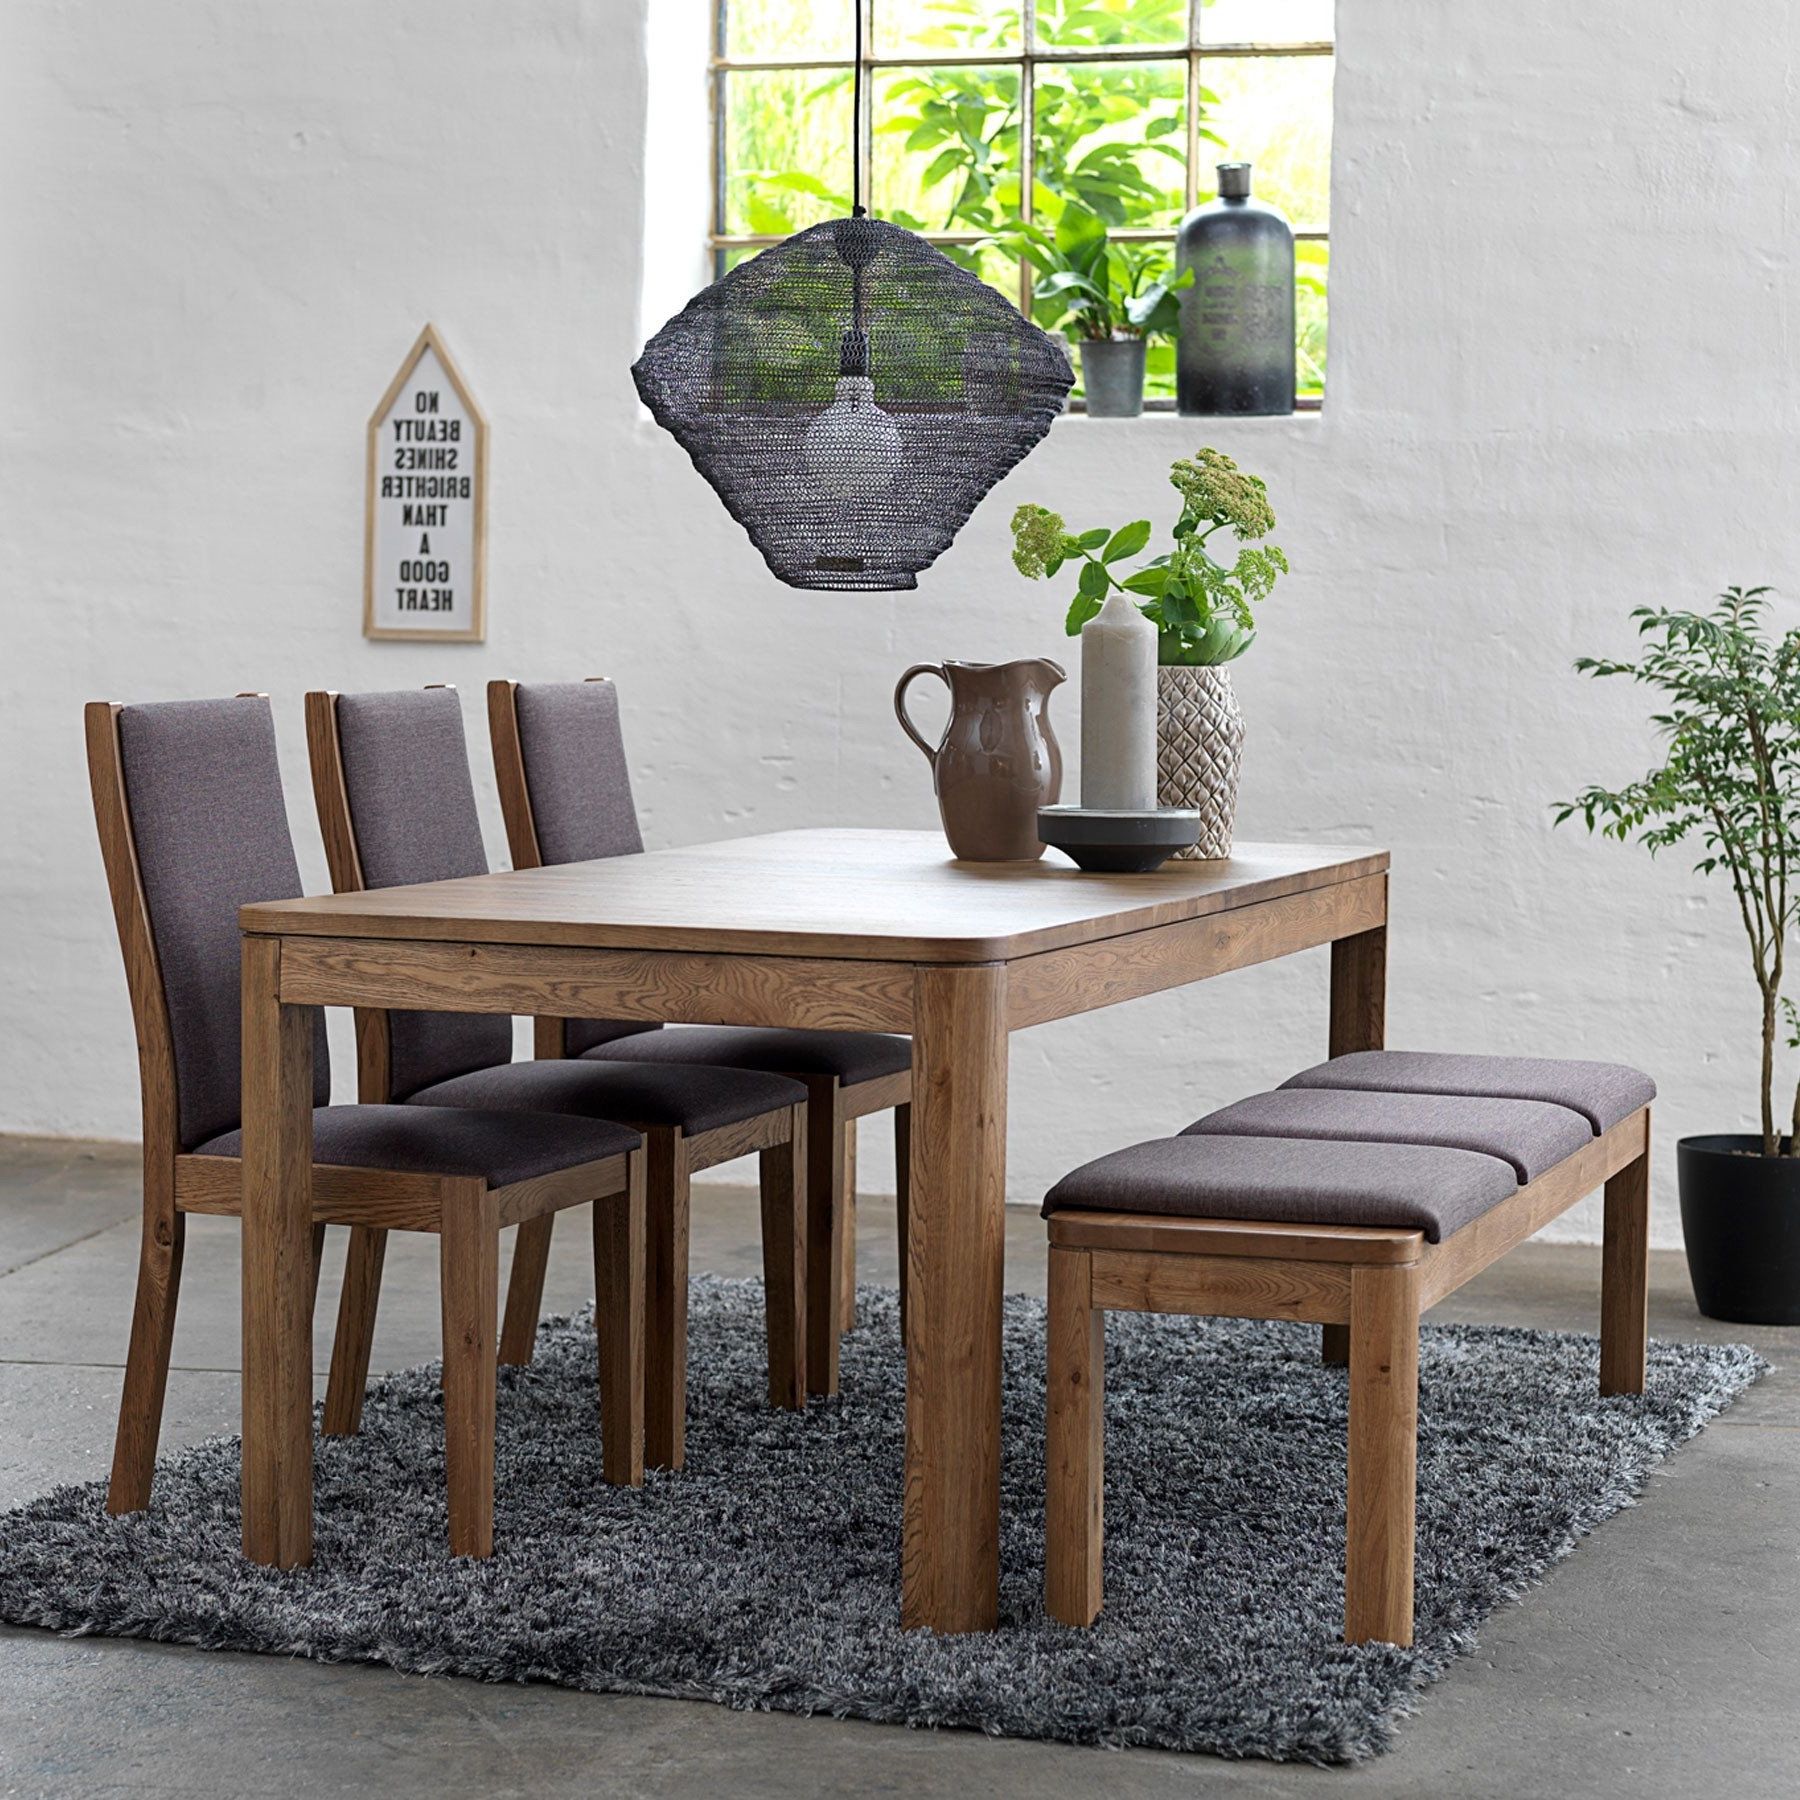 Most Recently Released Distressed Walnut And Black Finish Wood Modern Country Dining Tables Inside 50+ Dining Table With Bench You'll Love In 2020 – Visual Hunt (View 29 of 30)